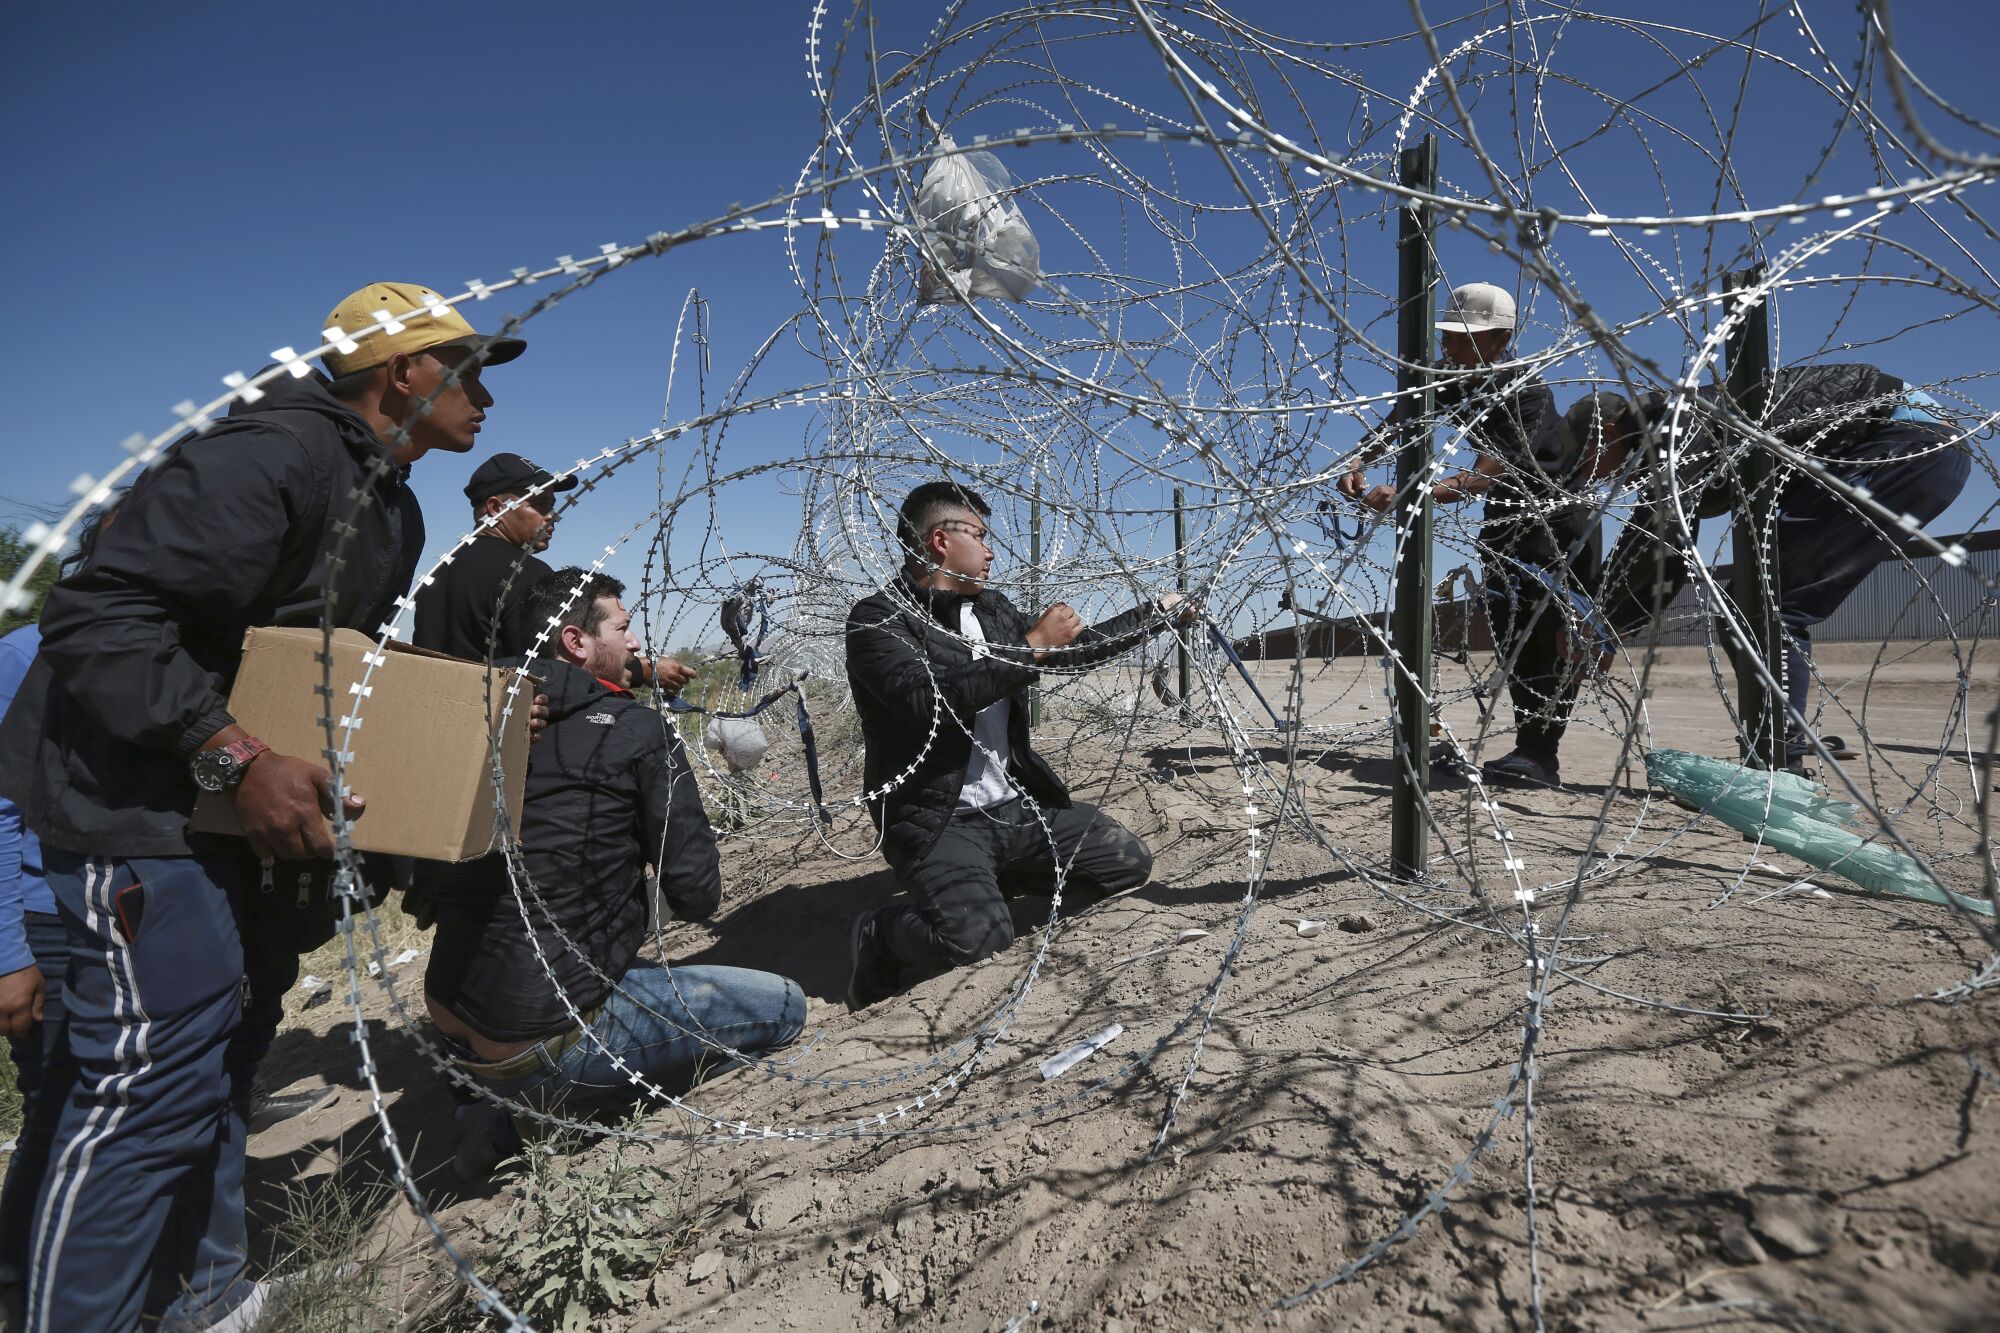 Migrants cross a barbed-wire barrier into the United States from Ciudad Juarez, Mexico.